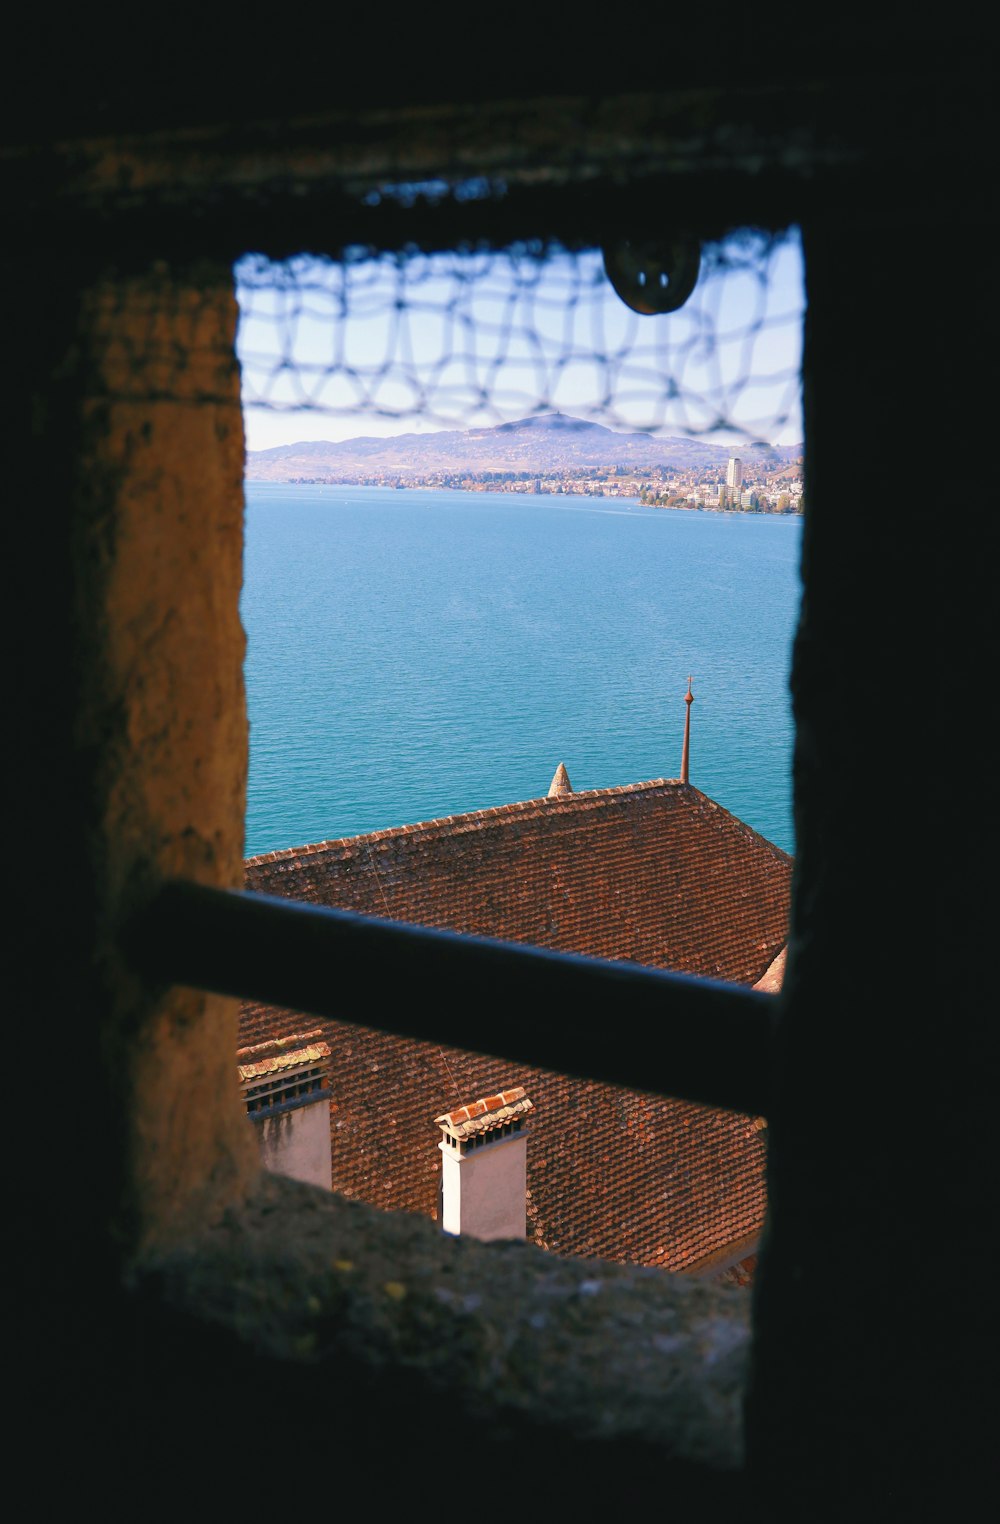 a view of a body of water through a window